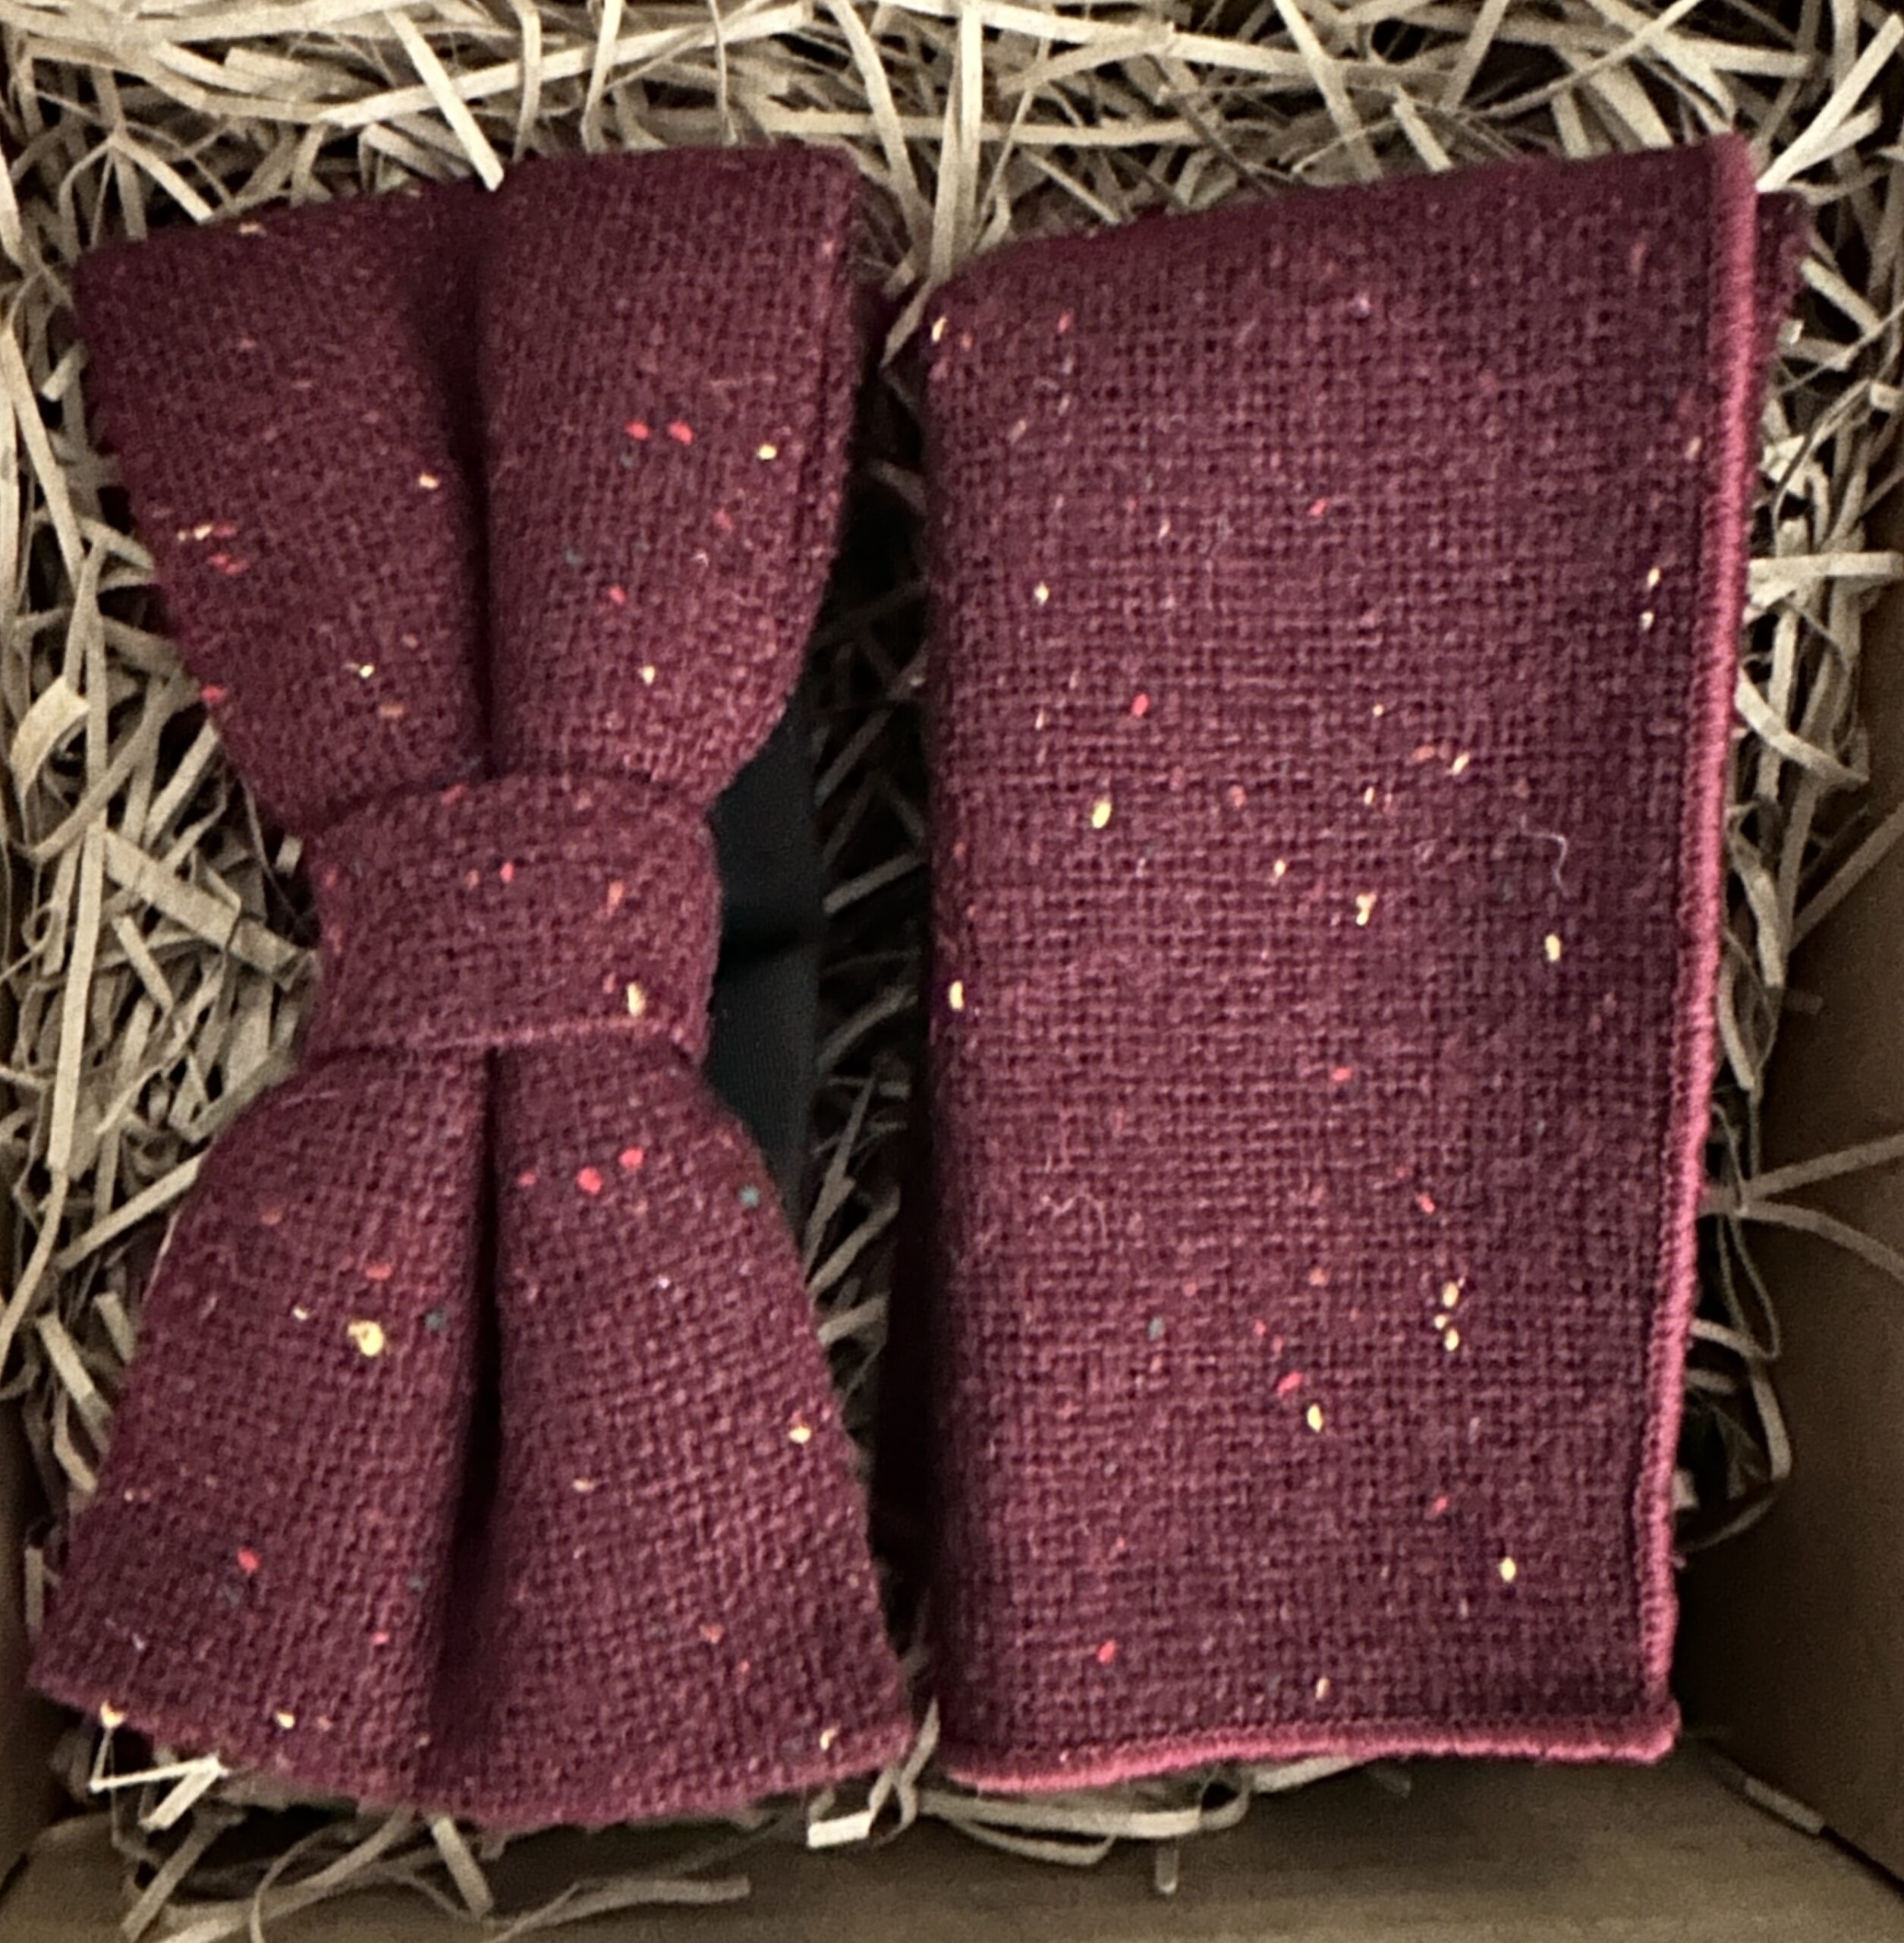 A photo of a burgundy red wool bow tie and pocket square for men's gifts and weddings